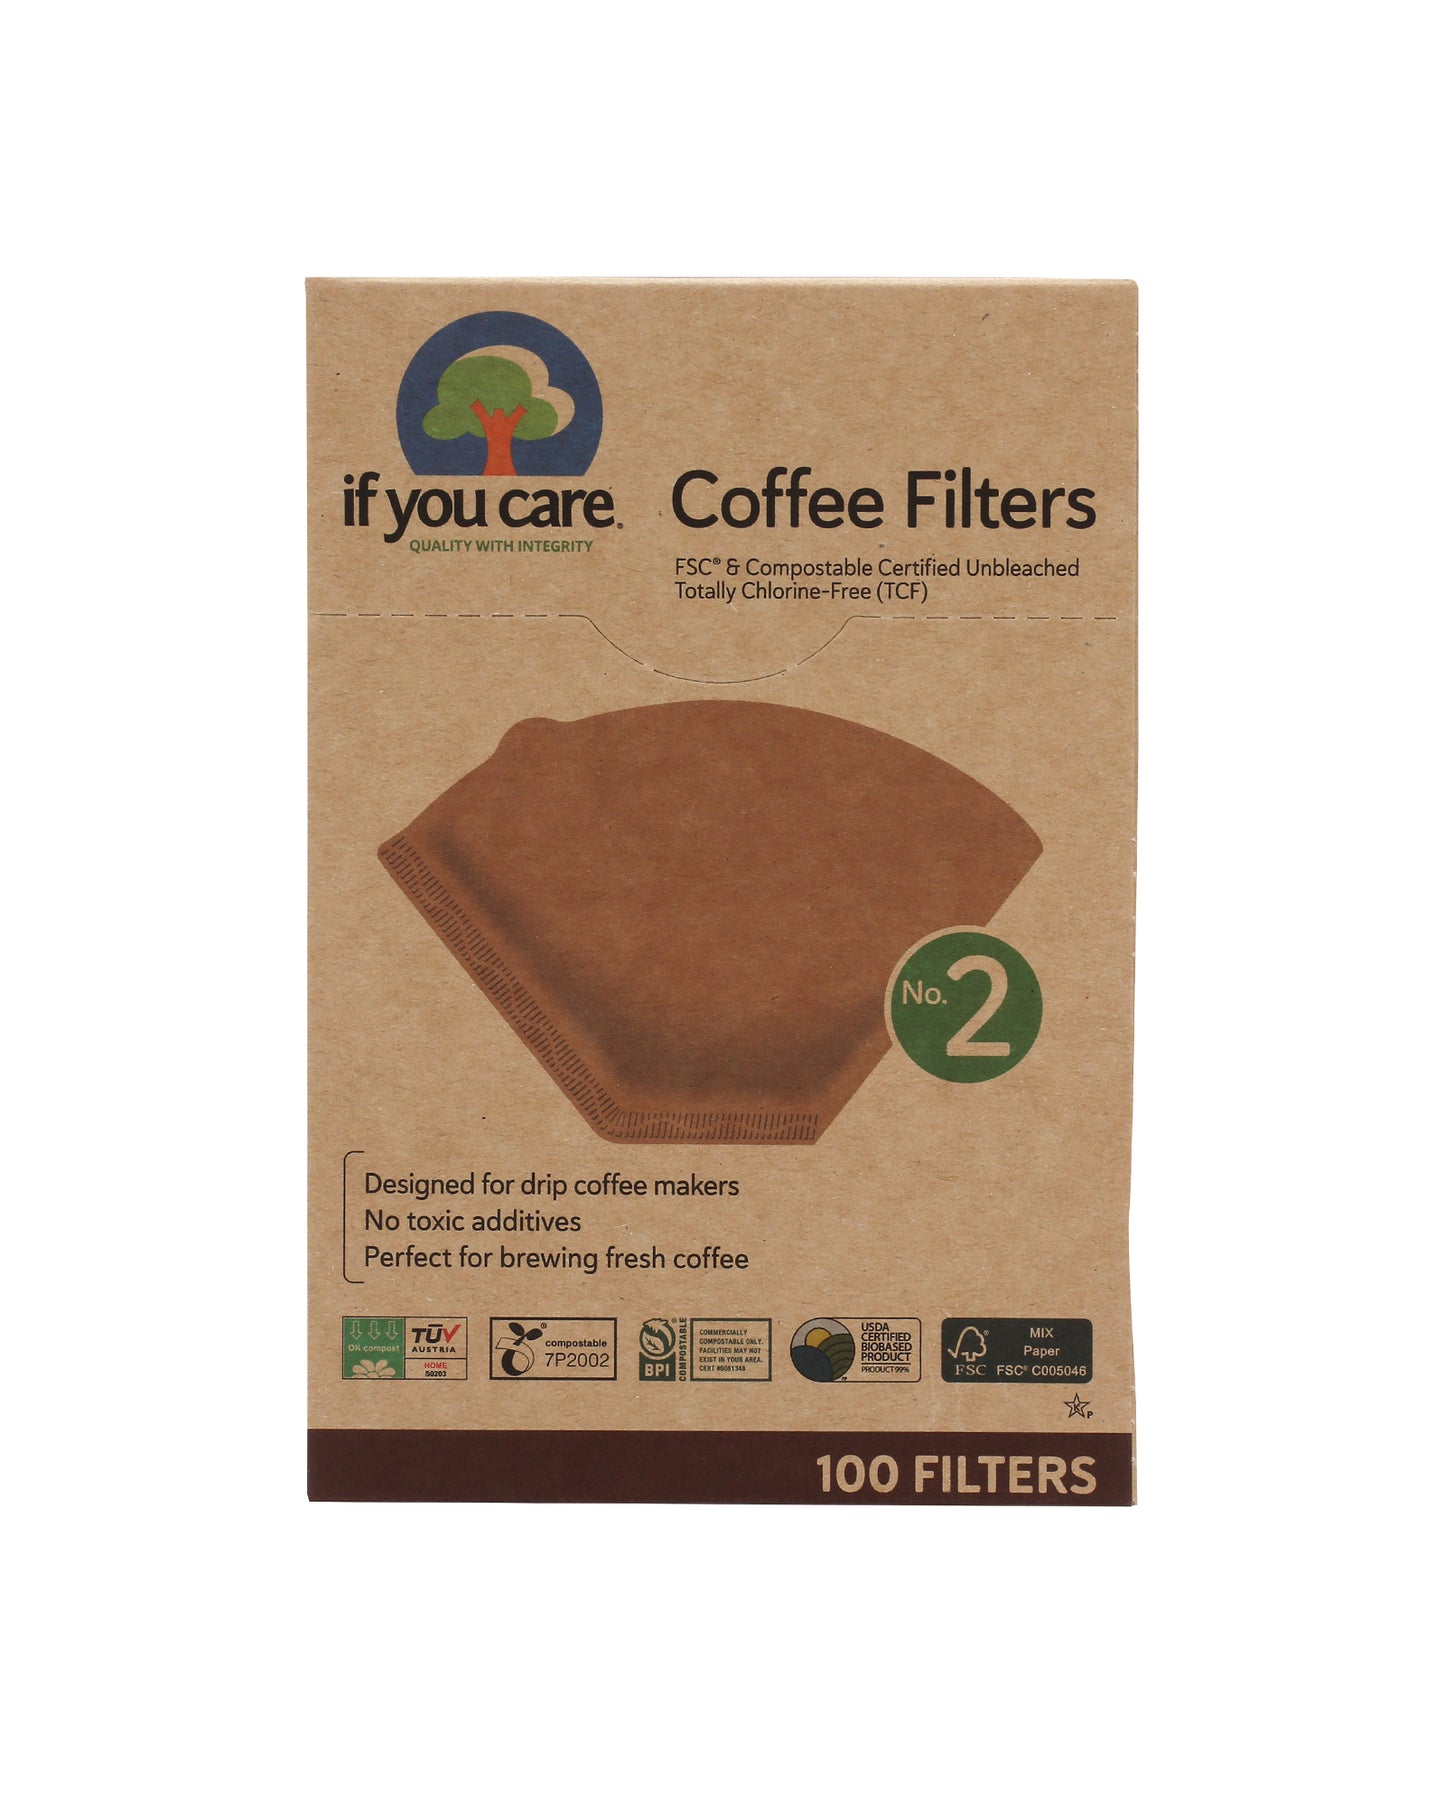 No. 2 Coffee Filters